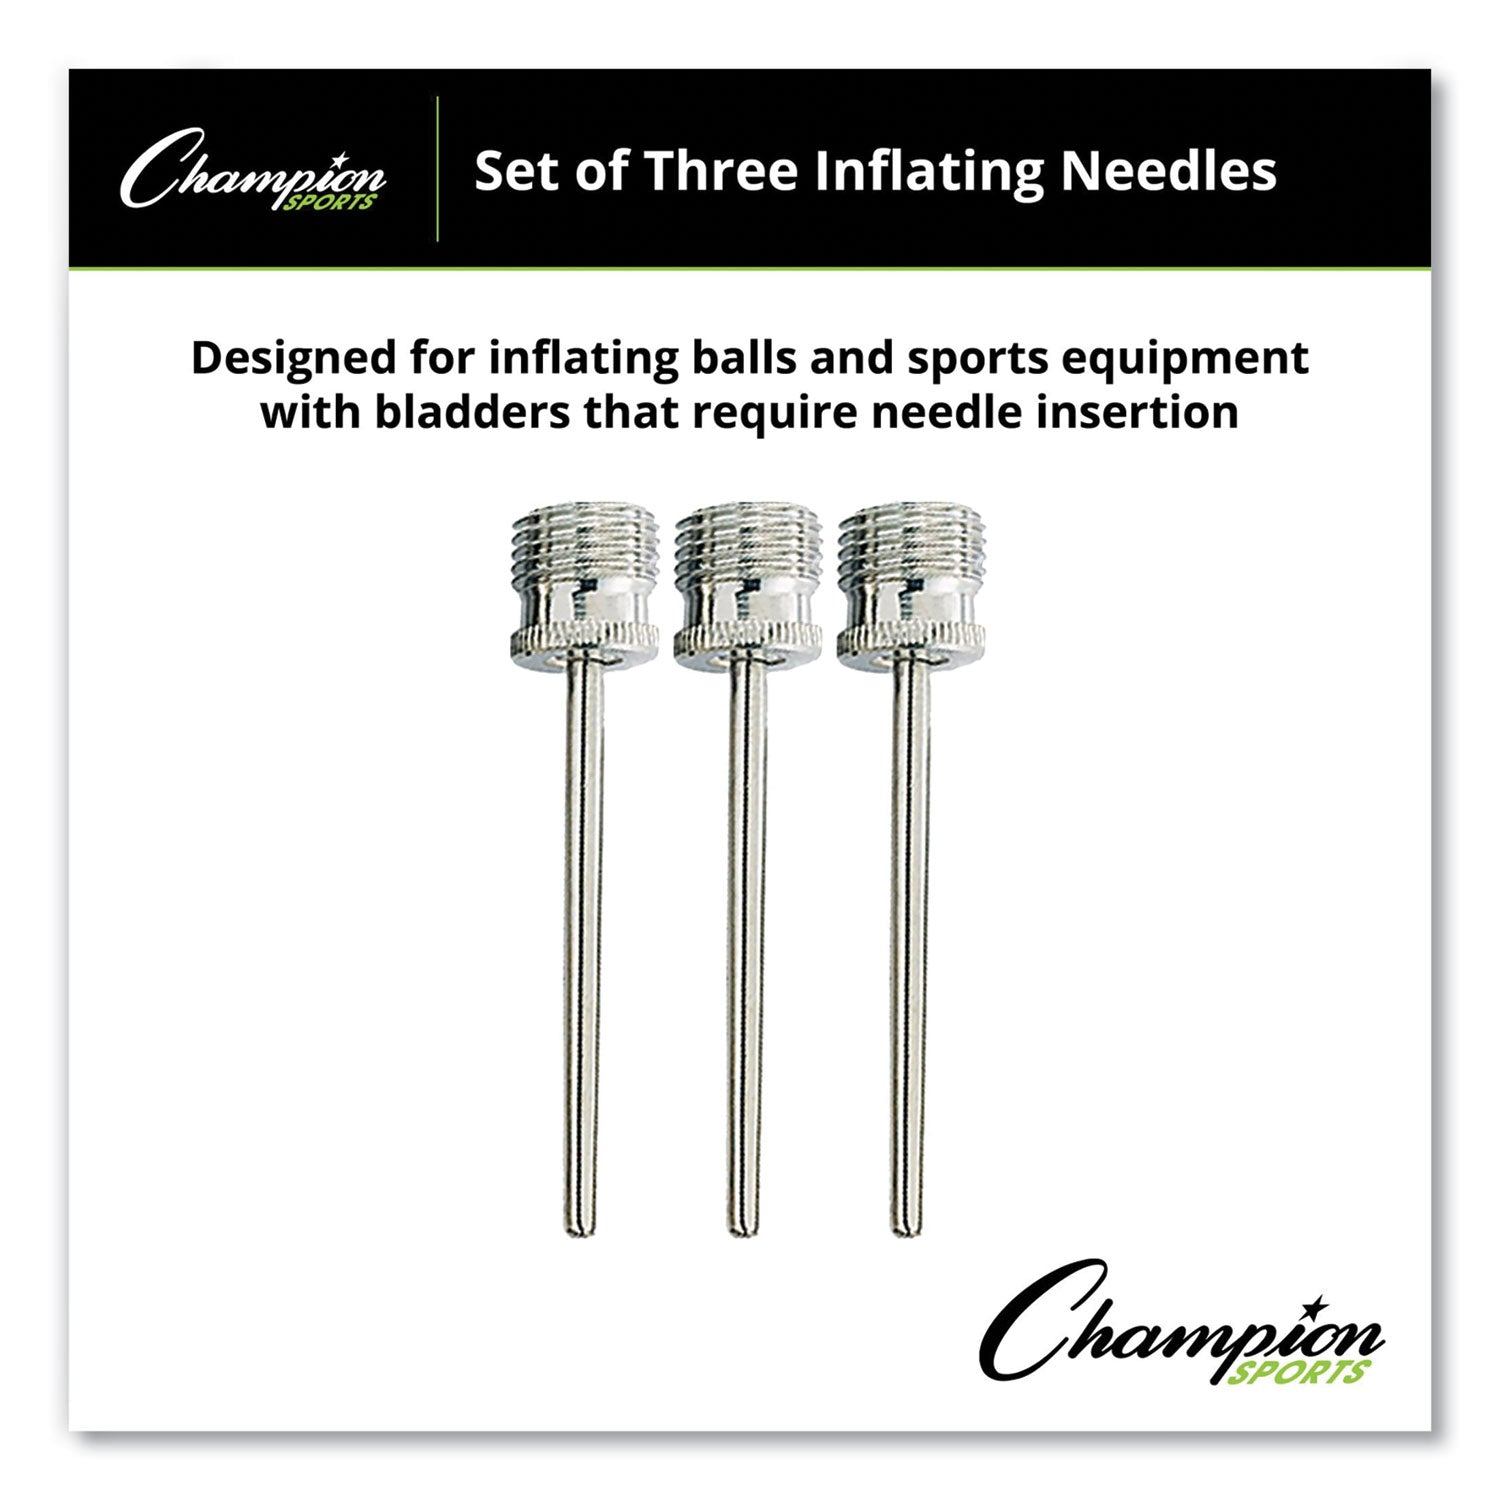 Nickel-Plated Inflating Needles for Electric Inflating Pump, 3/Pack - 